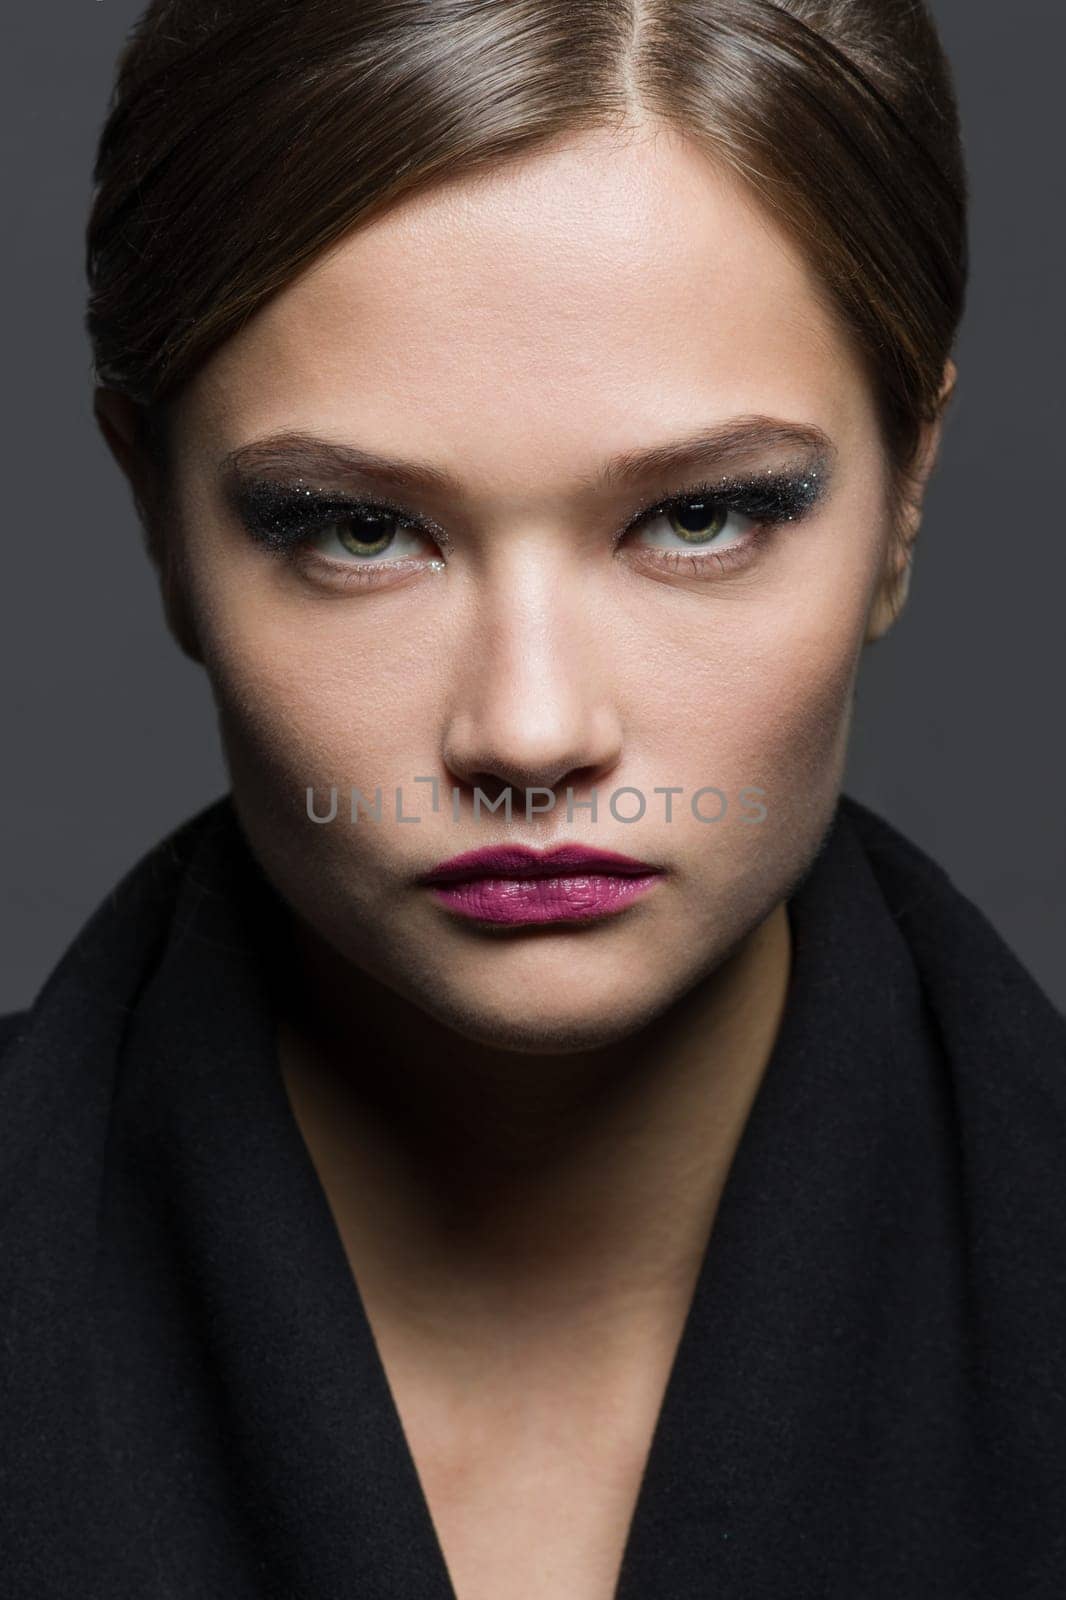 Beauty portrait of young woman with glamorous makeup hairstyle by VH-studio